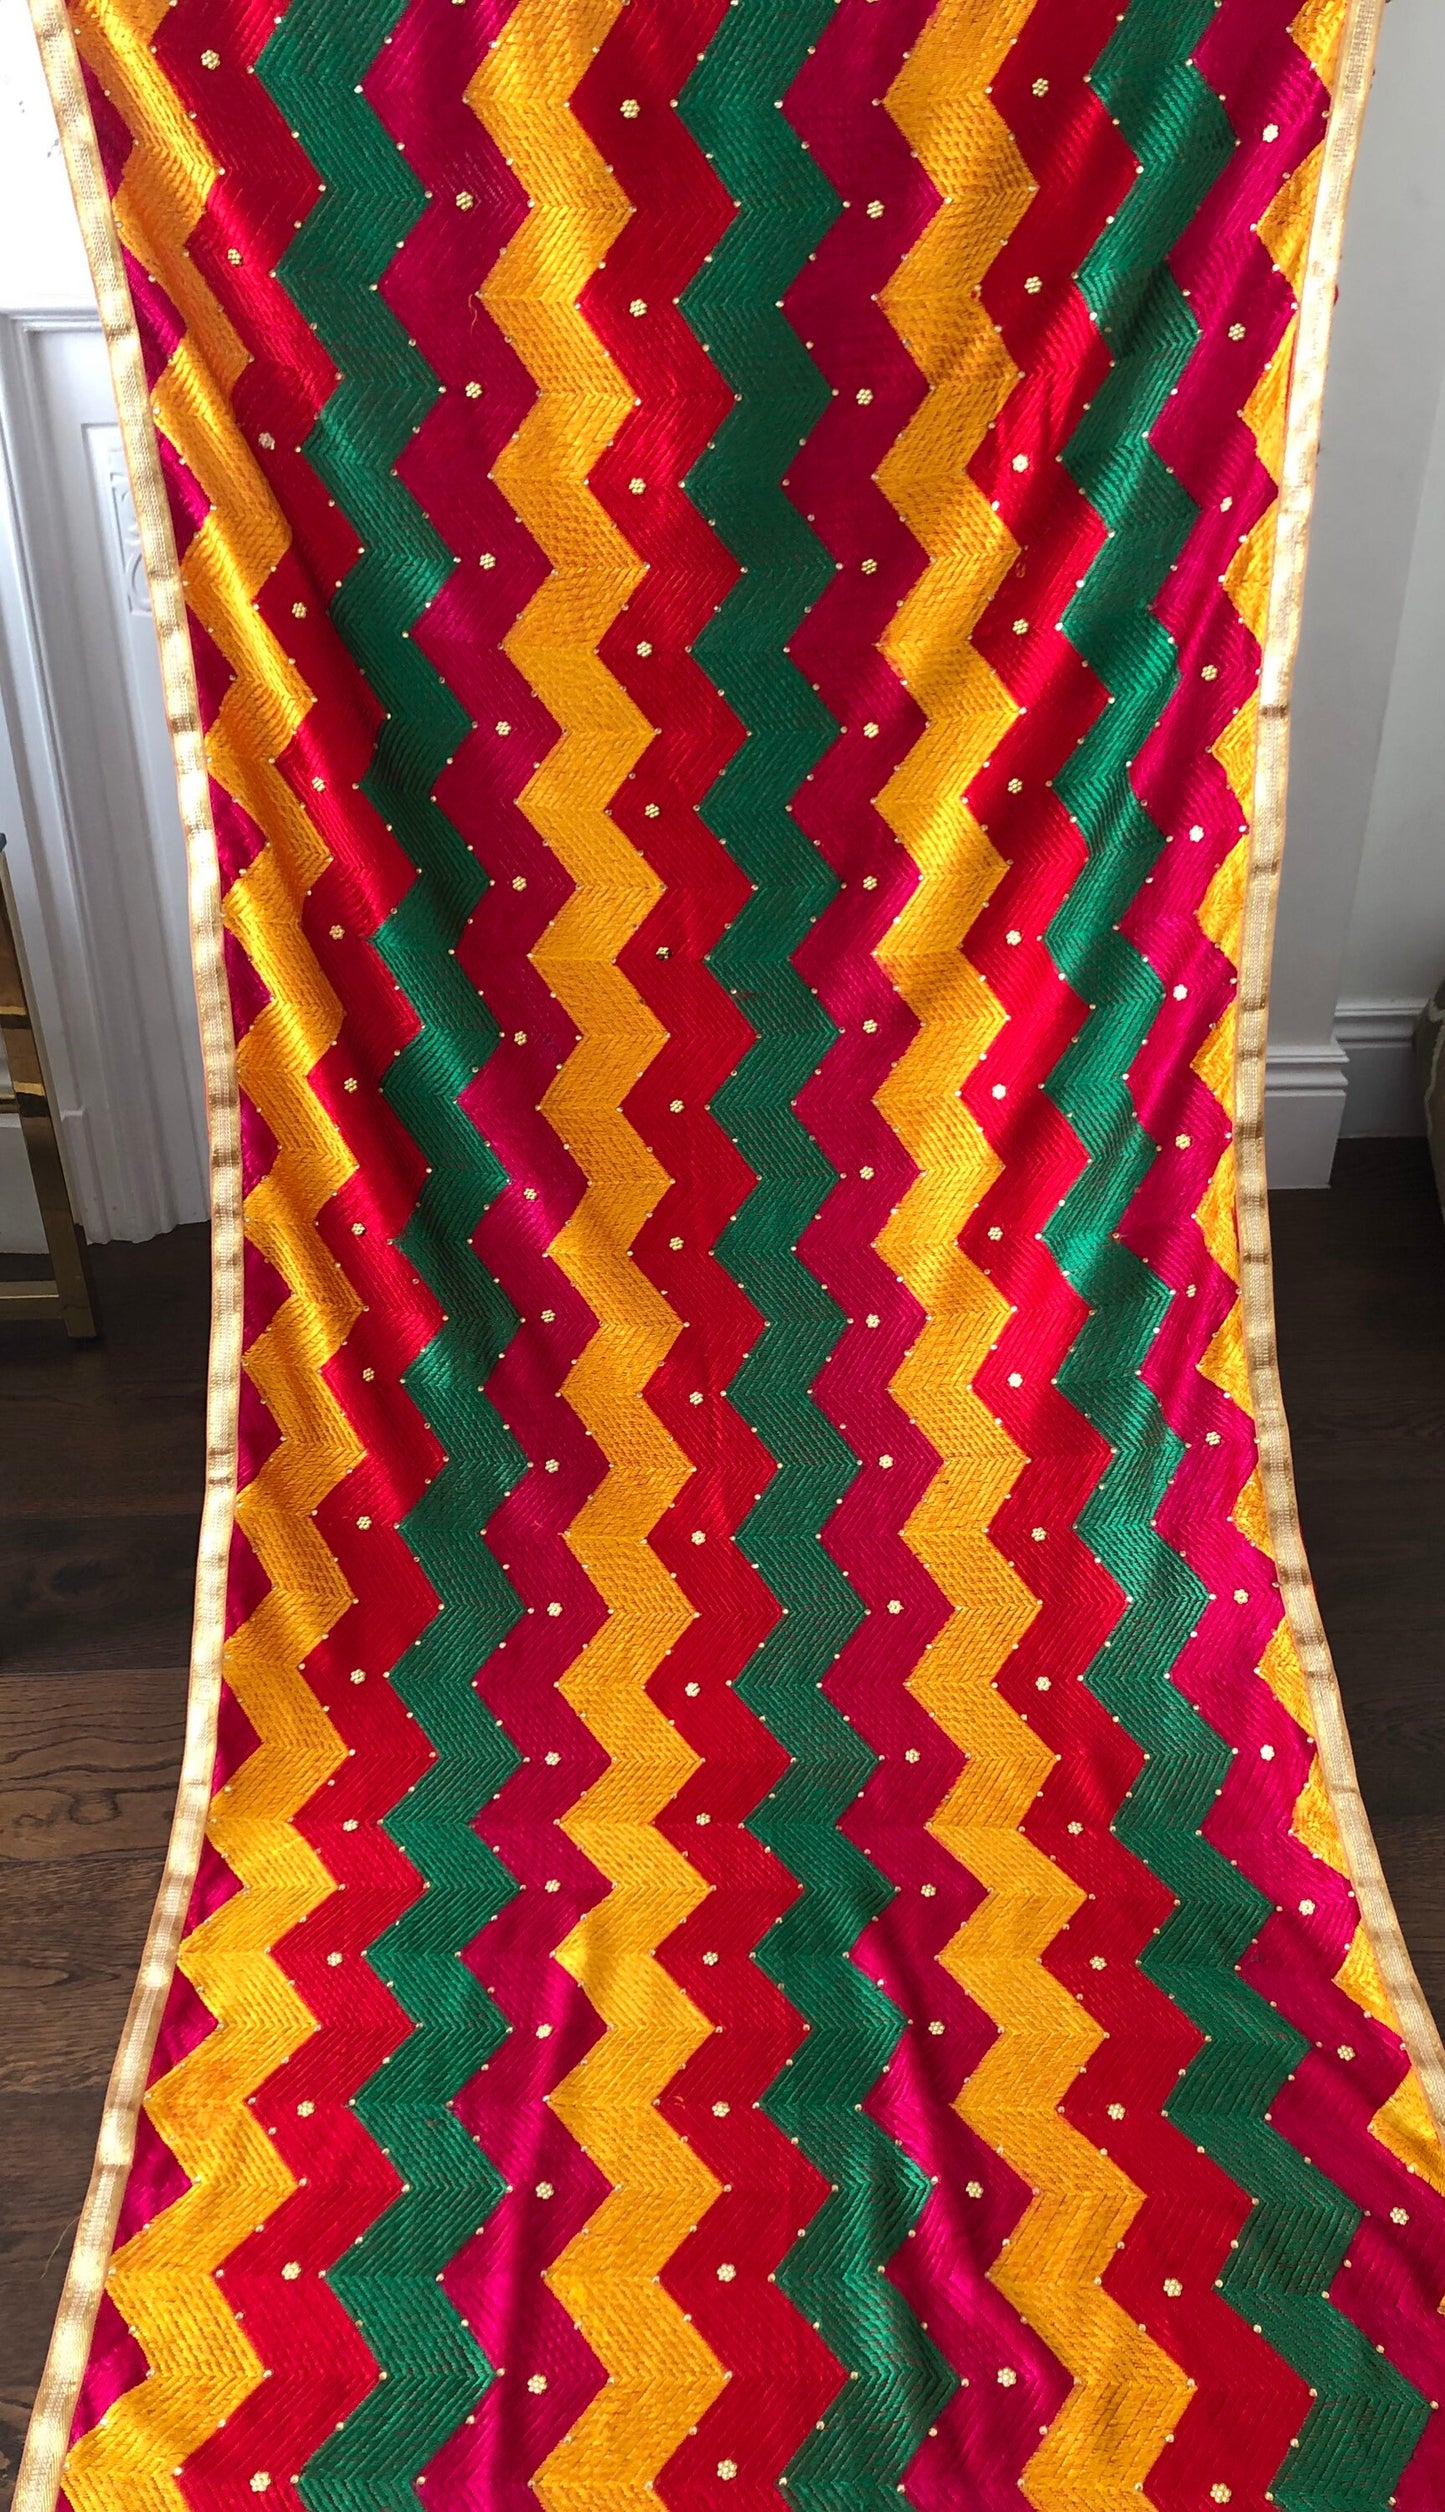 Chevron Phulkari Bagh Dupatta Fulkari with or Without embellishments Punjab Weddings Shawl Two Options Compliments any colour outfit